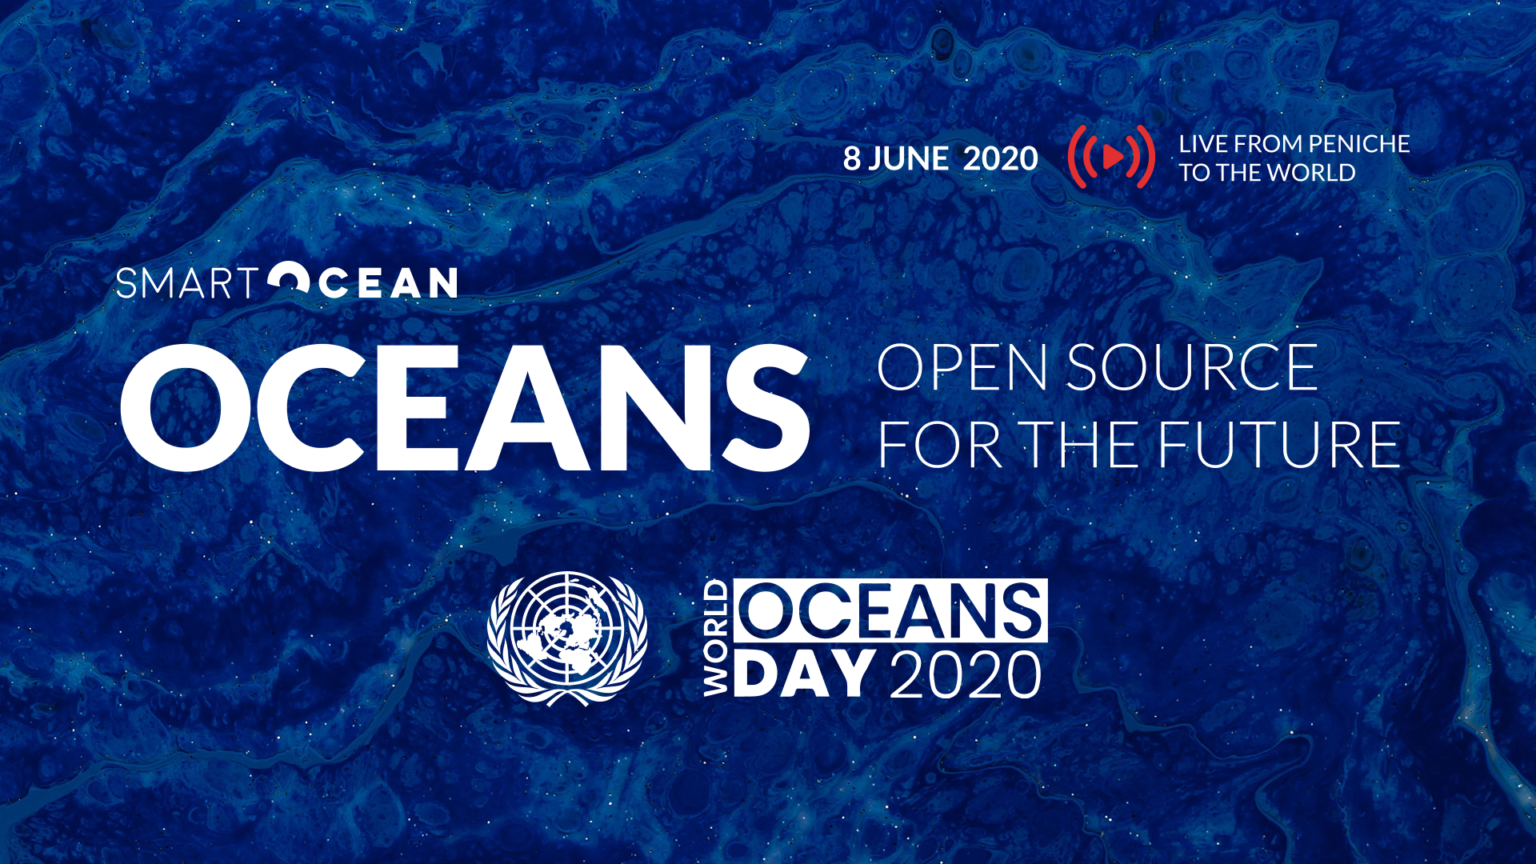 Oceans: Open Source for the Future